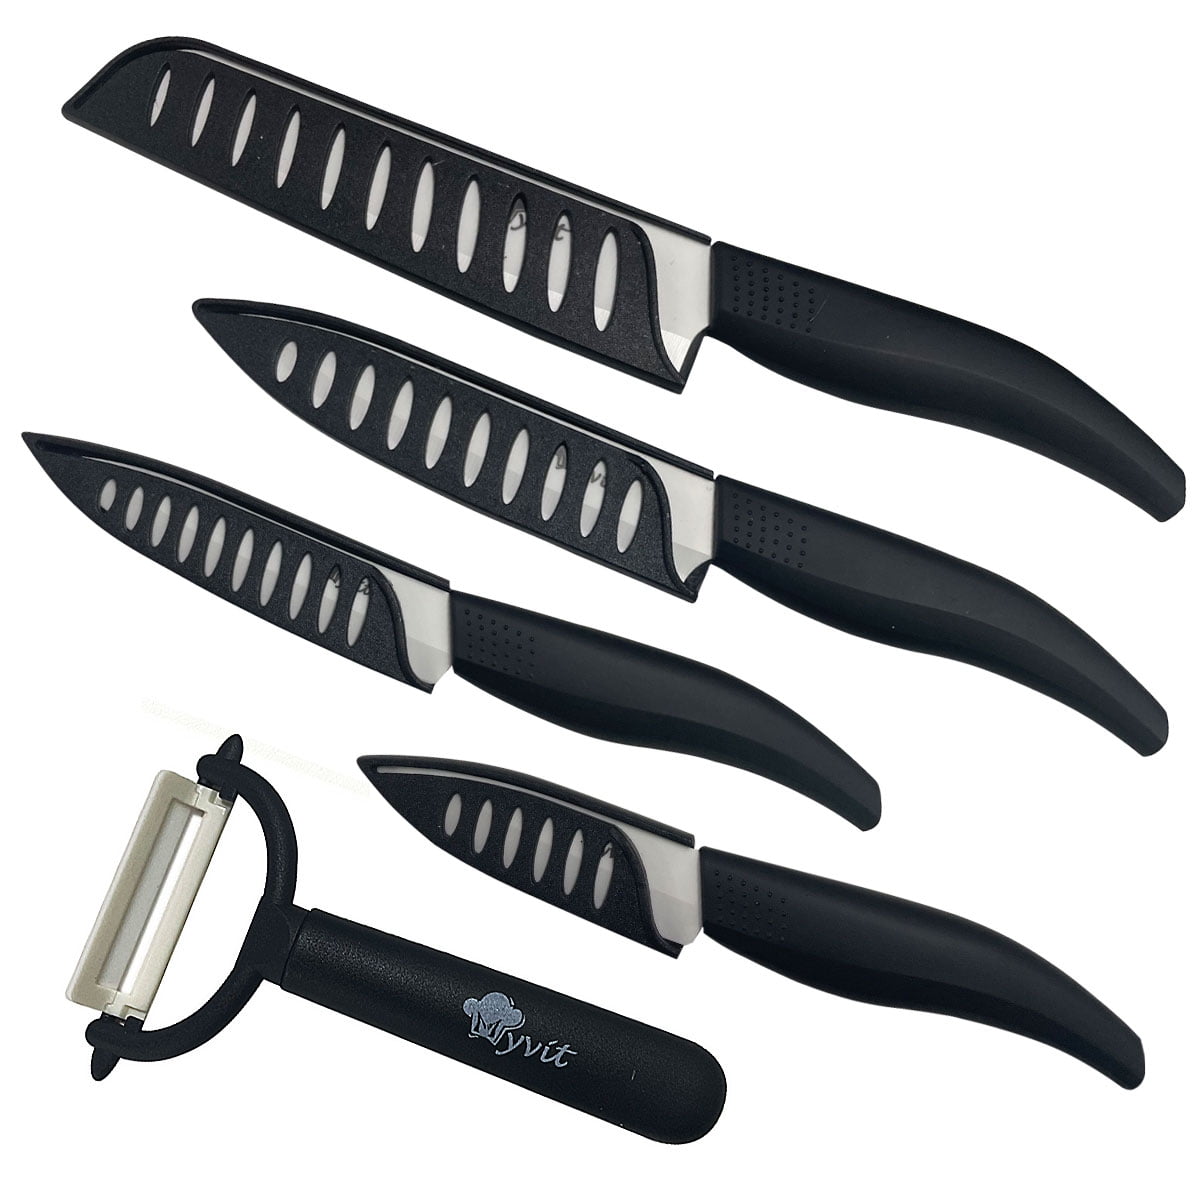 WACOOL Ceramic Knife Set 3-Piece (6-inch Chef's Knife, 5-inch Utility  Knife,4-inch Fruit Paring Knife), with 3 Knife Sheaths for Each Blade  (Colorful